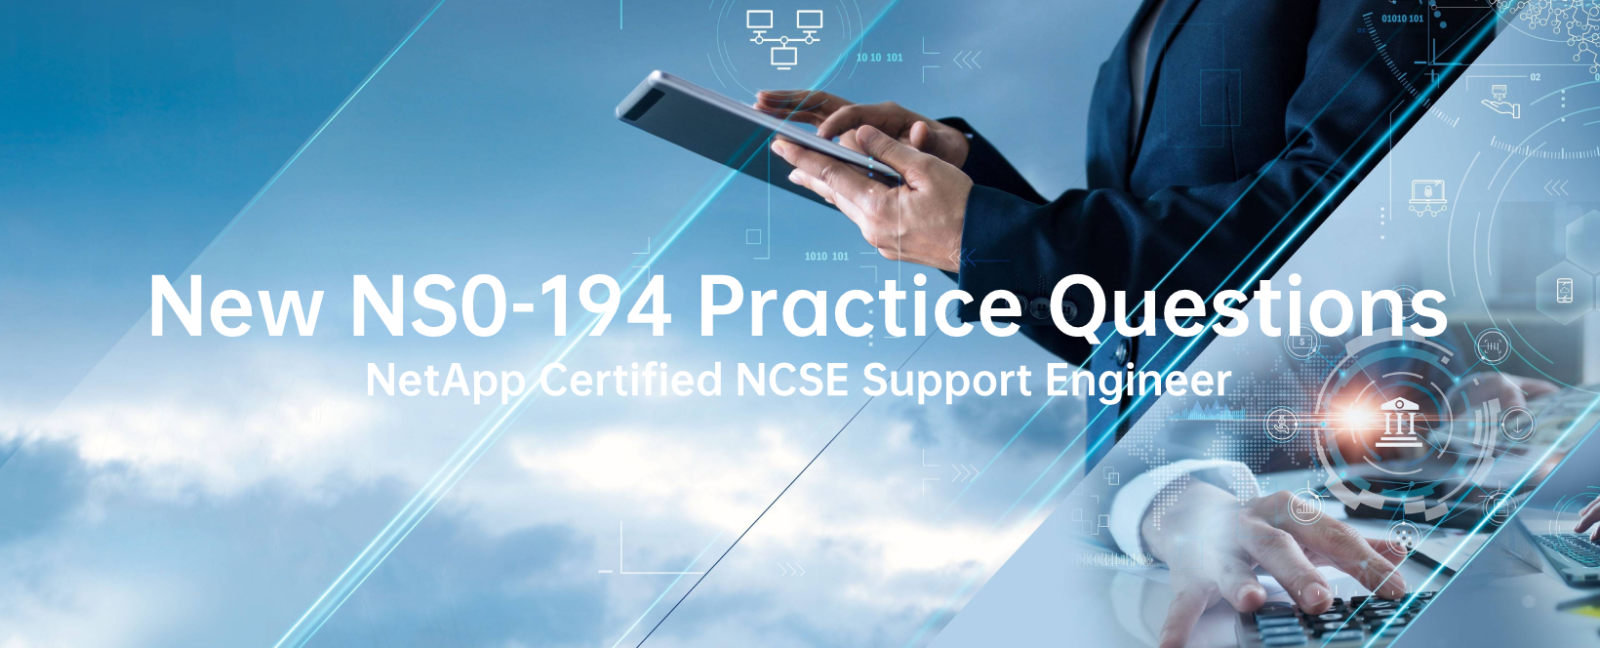 NS0-194 practice questions